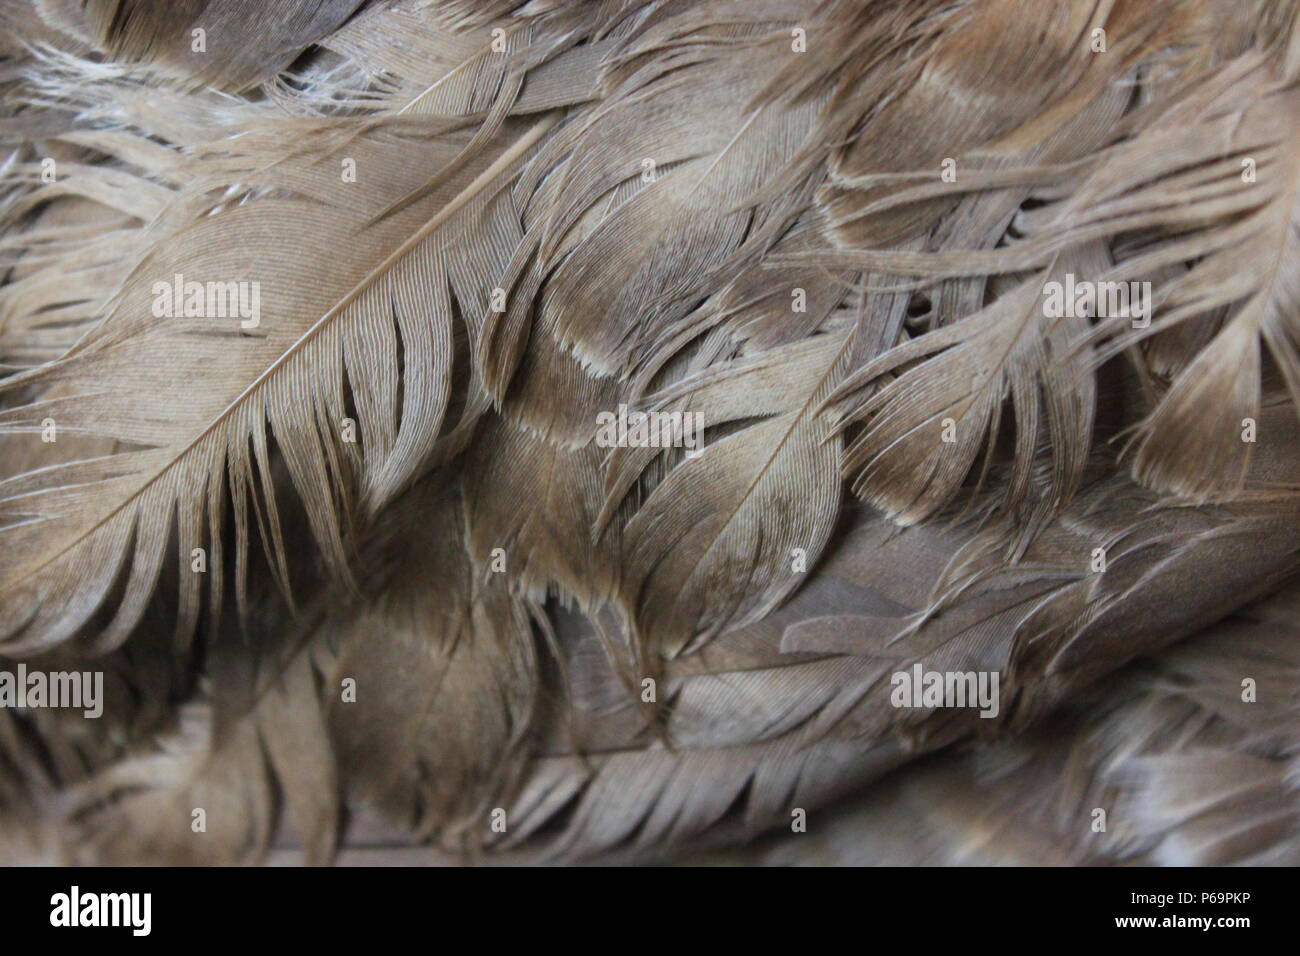 Closeup of brown feathers and plumage of a wild bird. Stock Photo